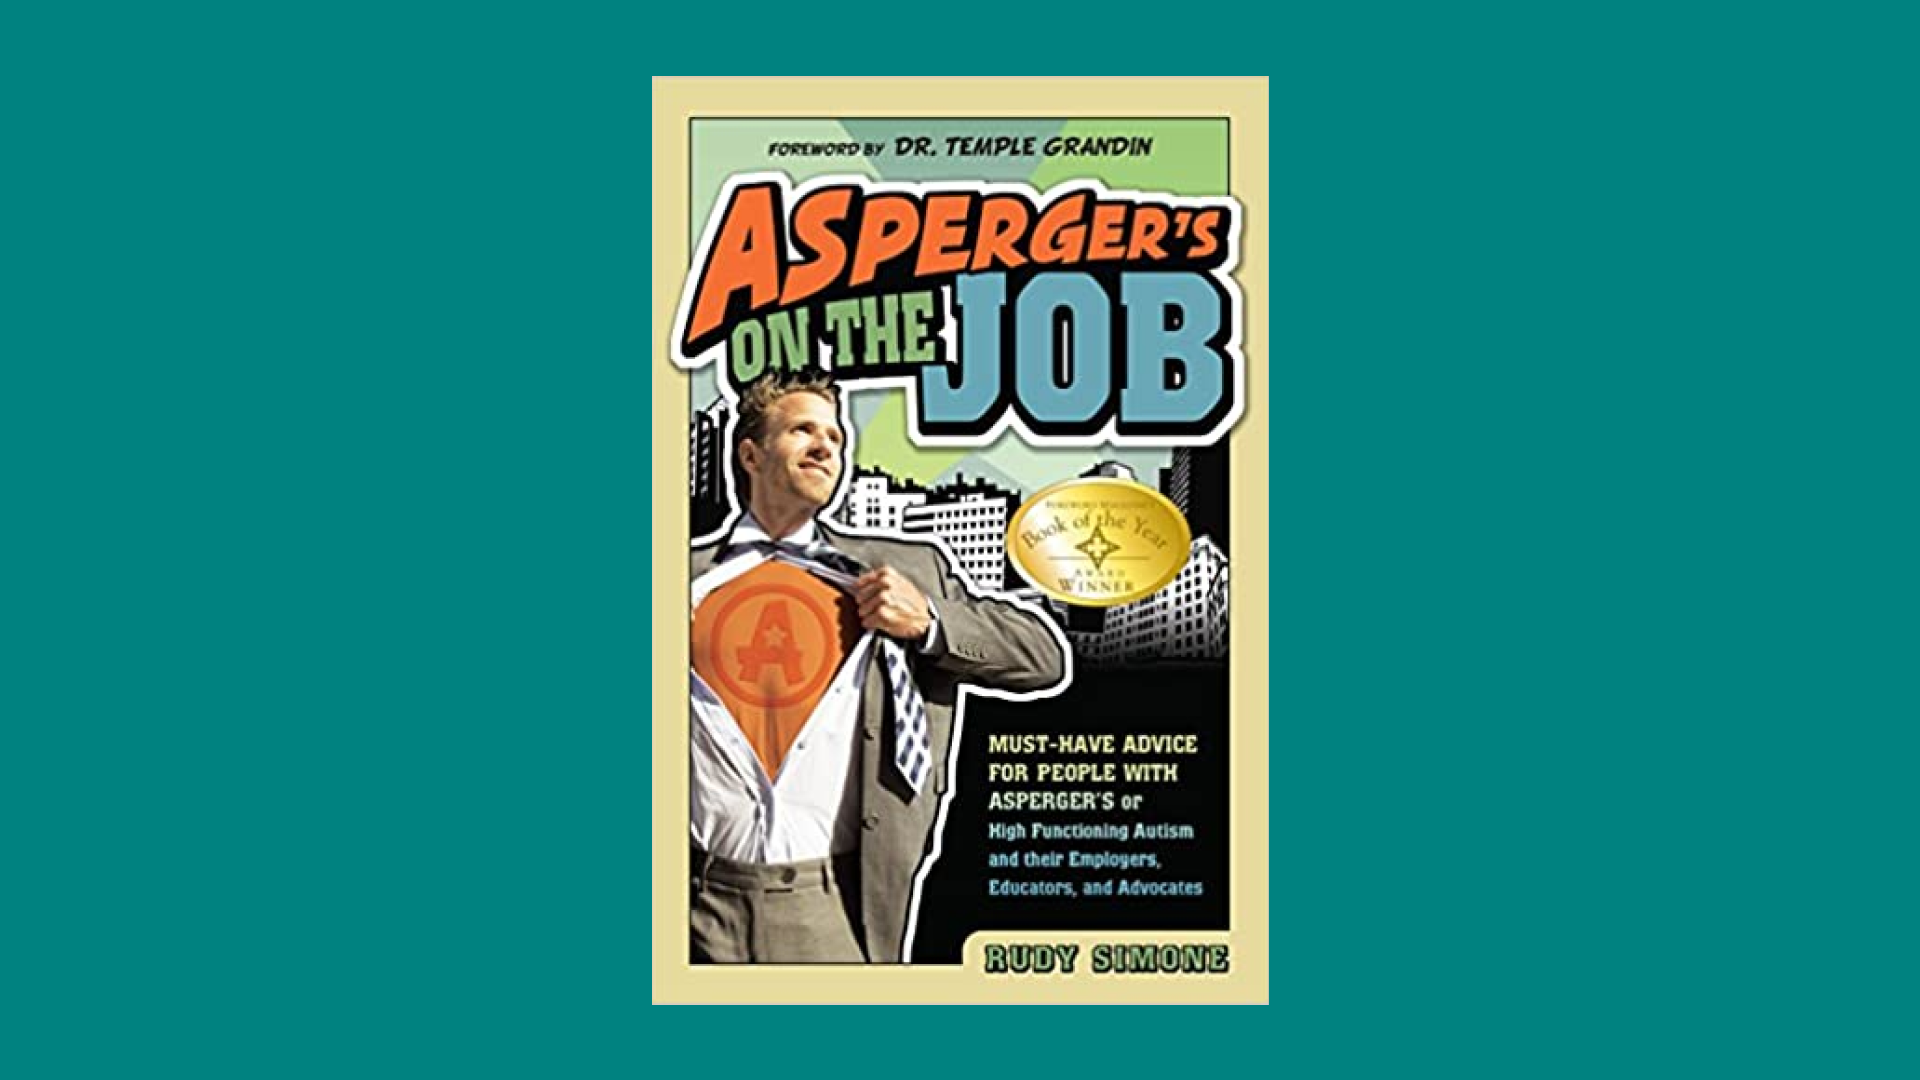 Cover of book "Asperber's on the Job," with a man undoing his tie and revealing a Superman-style "A" on his chest